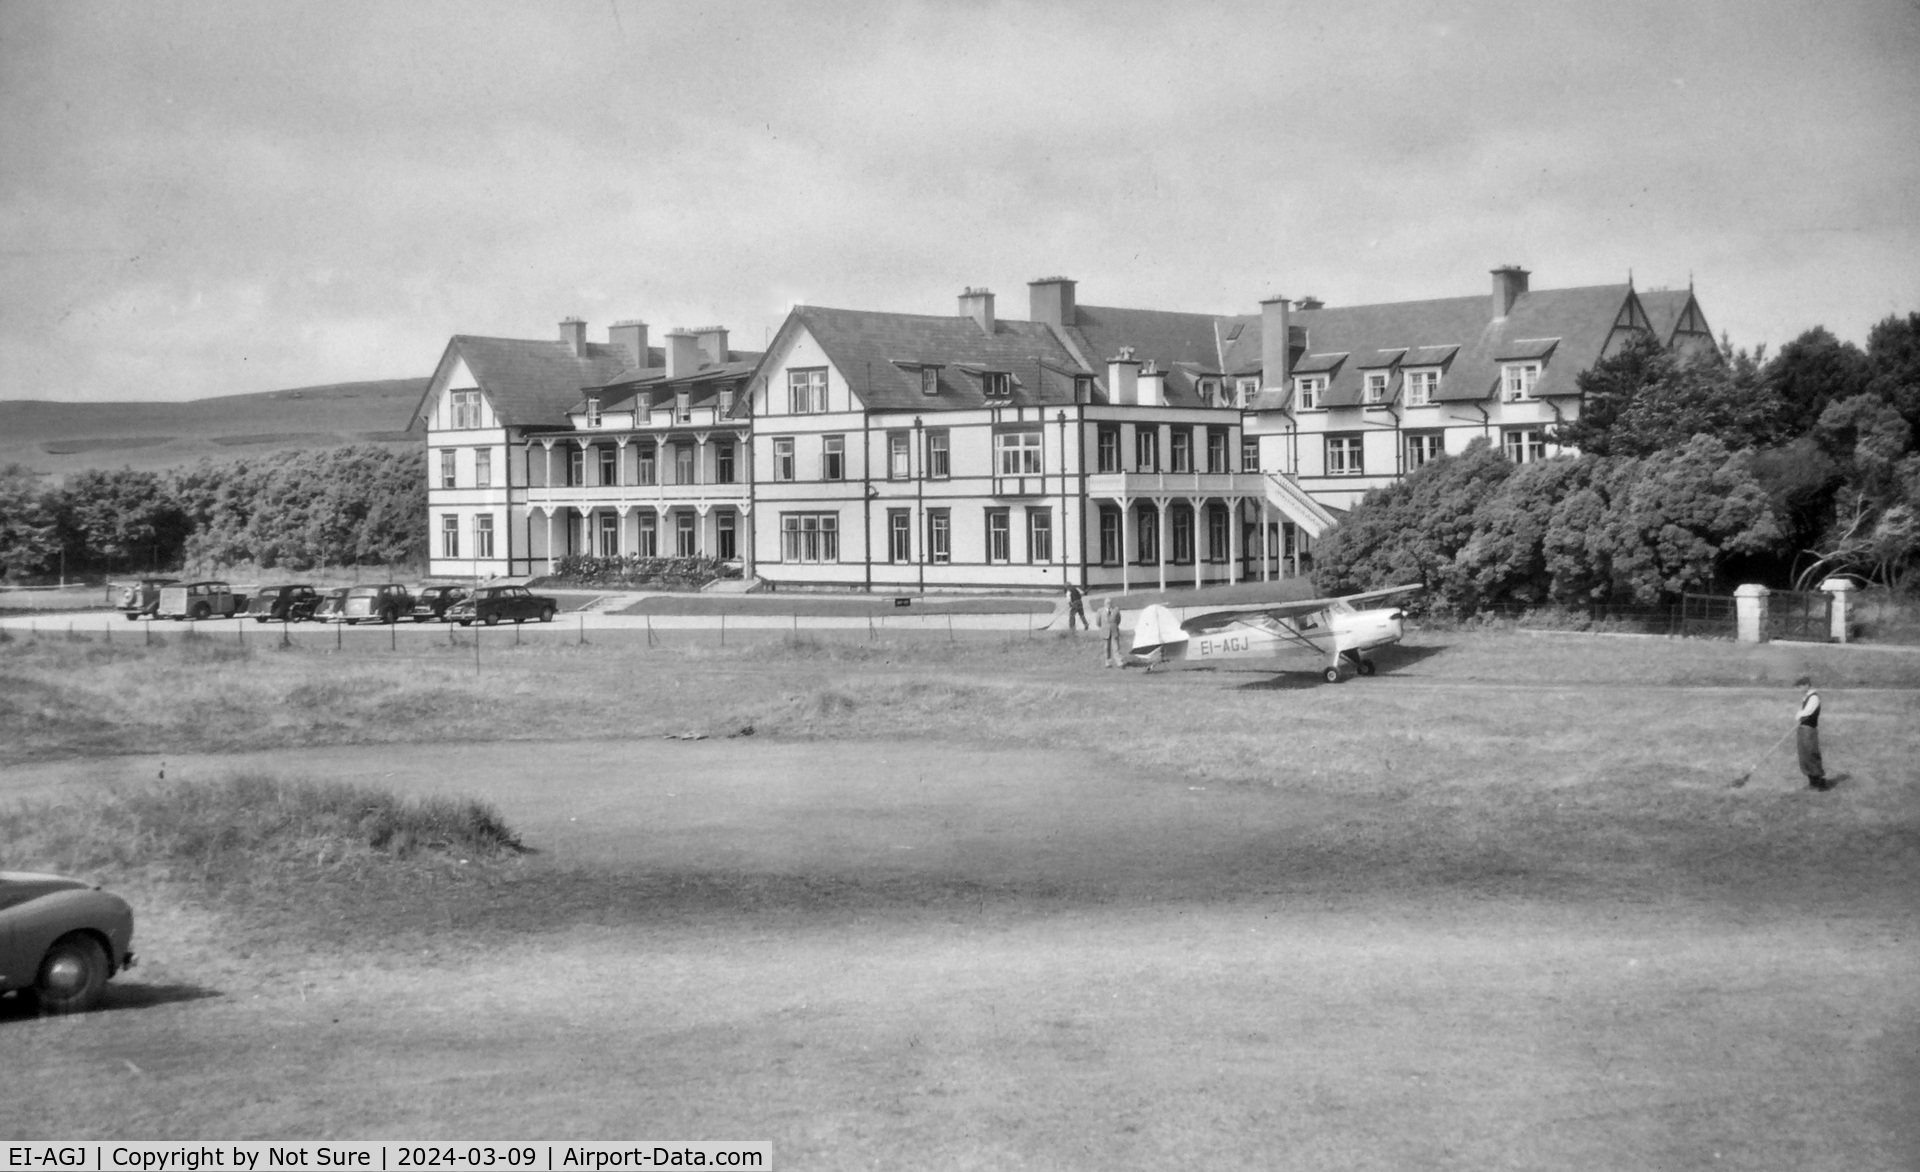 EI-AGJ, 1946 Auster 5J-1 Autocrat C/N 2208, Found this photo in old book..Taken at Rosapenna Hotel Donegal Ireland  
C. 1954